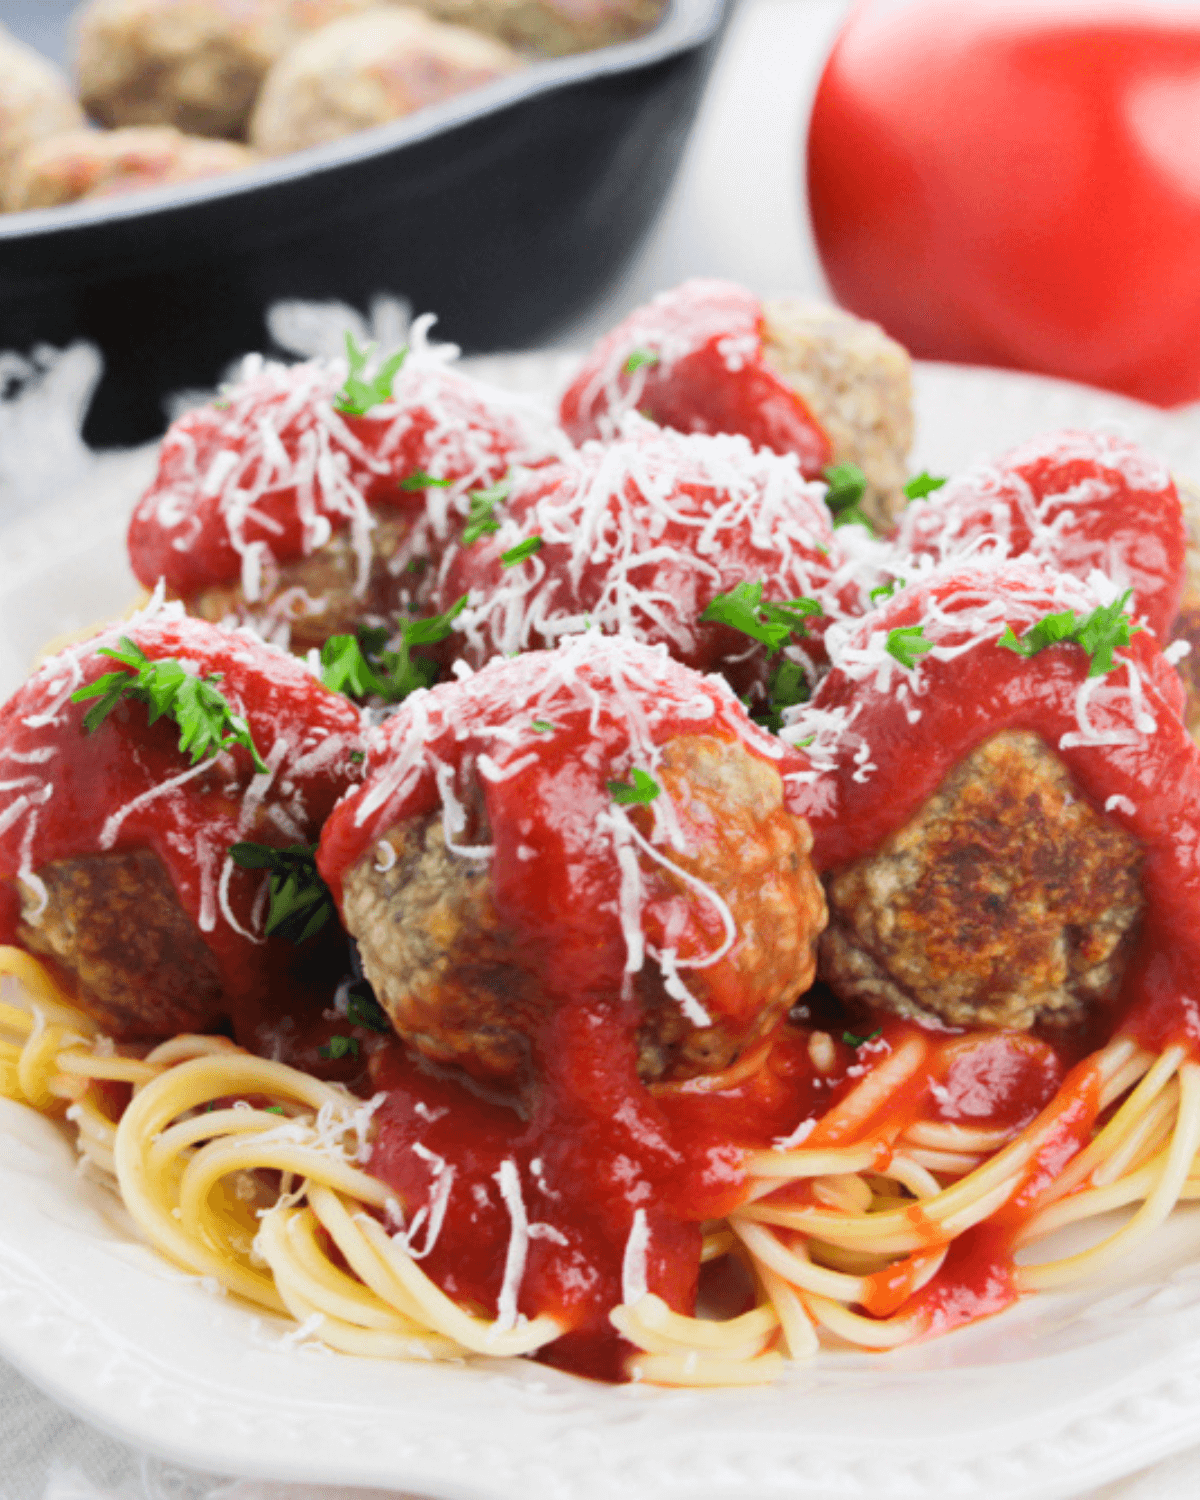 Ricotta meatballs served on a plate with spaghetti and sauce.